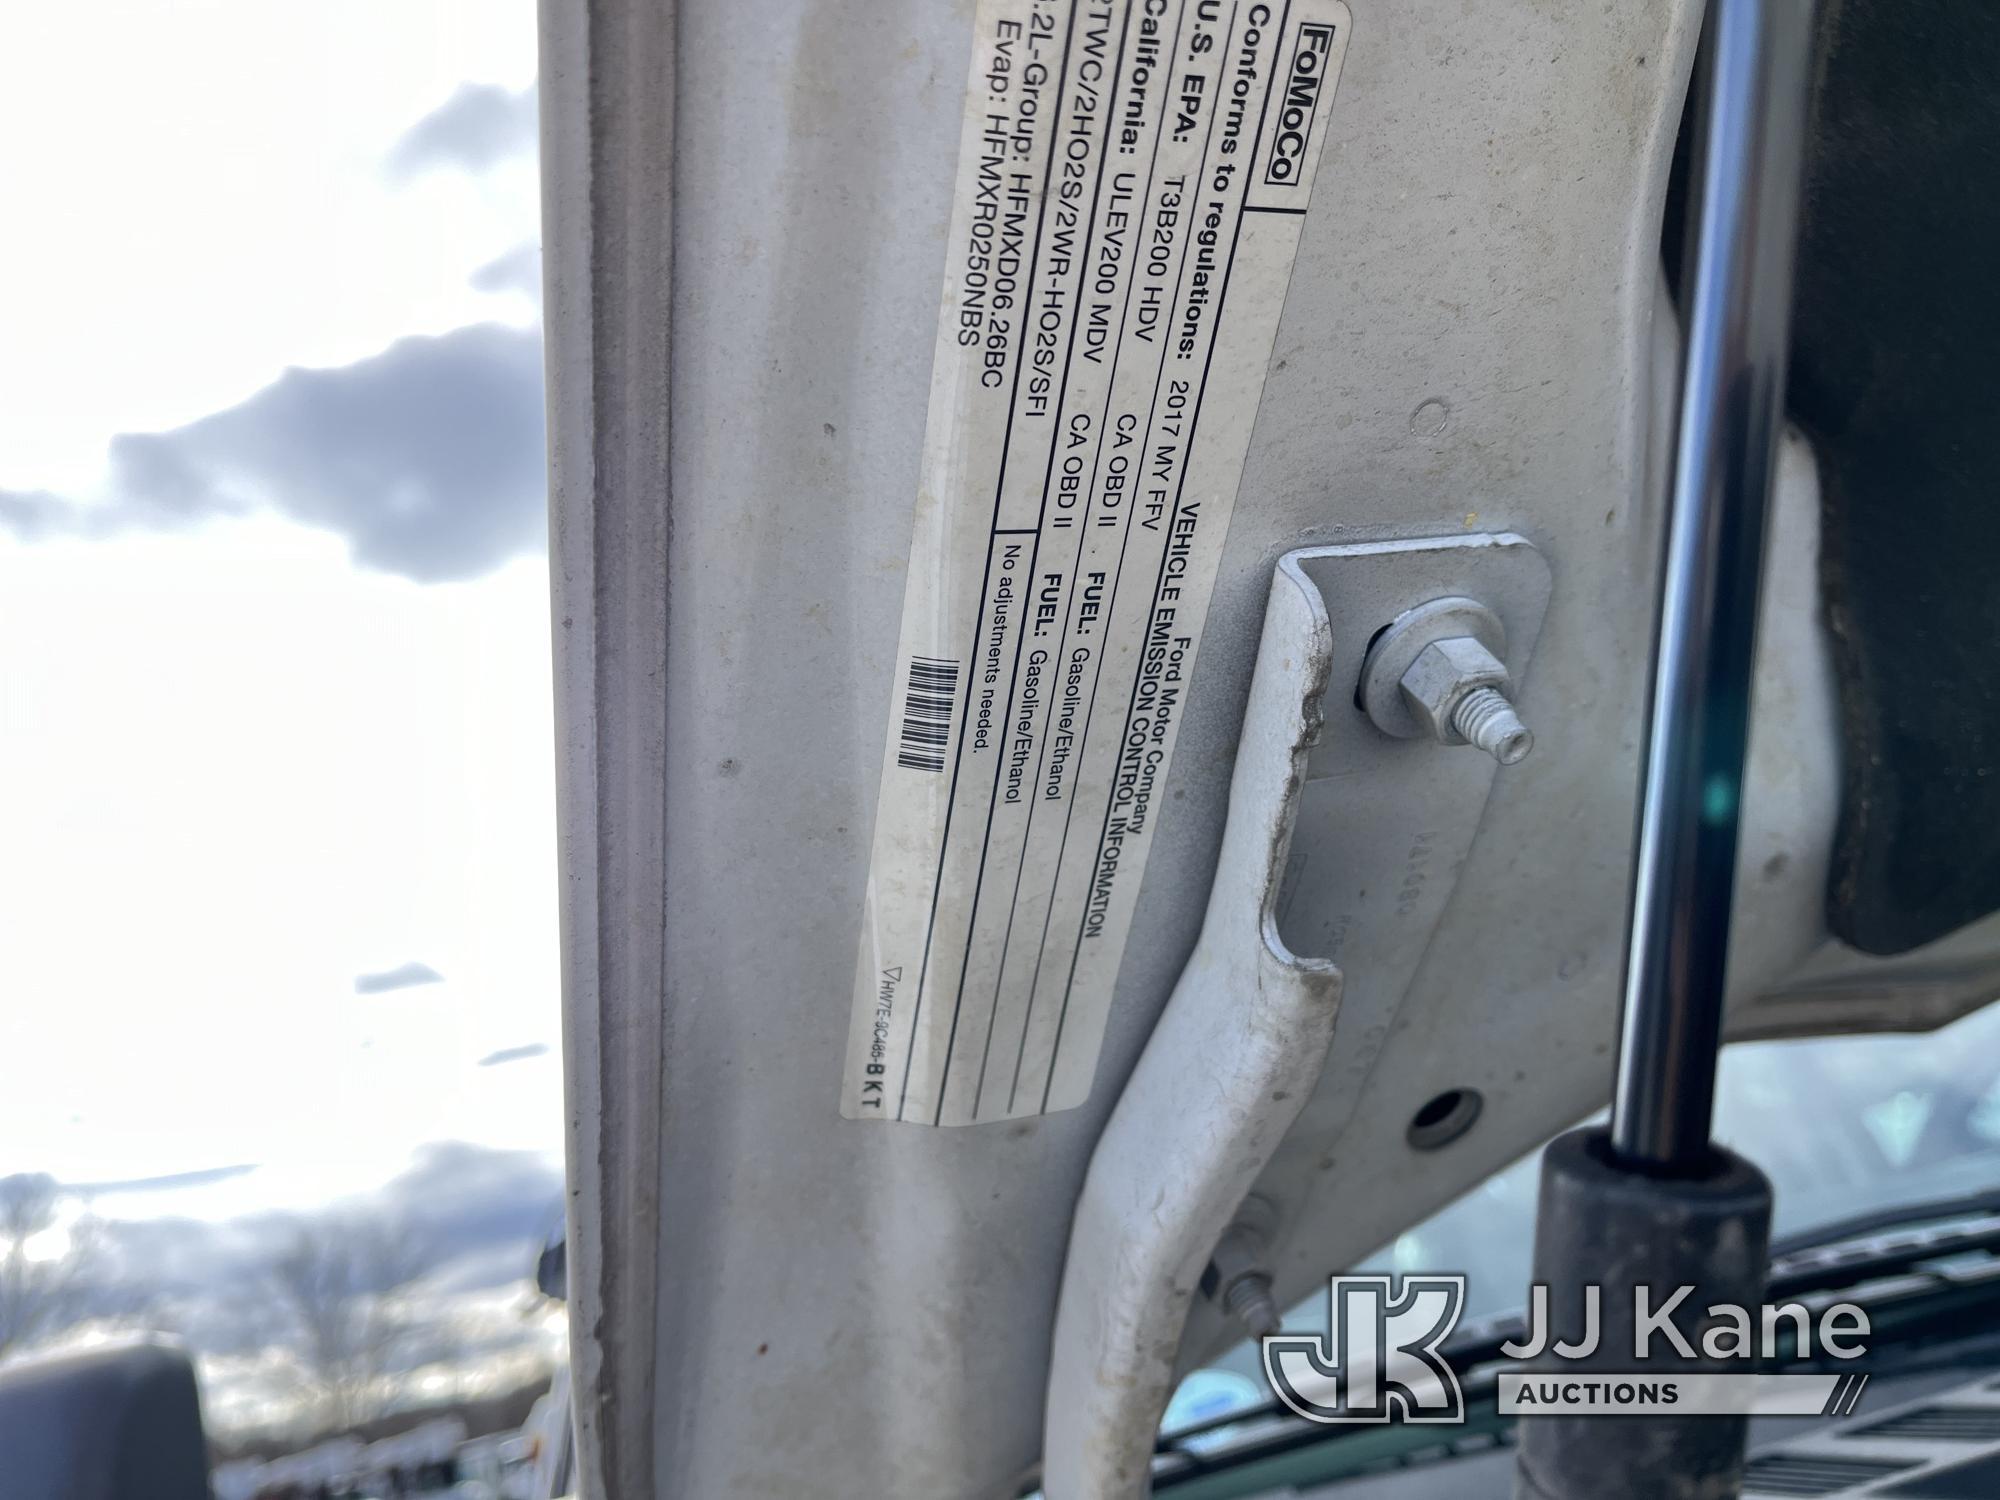 (Smock, PA) 2017 Ford F250 4x4 Extended-Cab Pickup Truck Runs & Moves, Side Mirror Housing Broken &